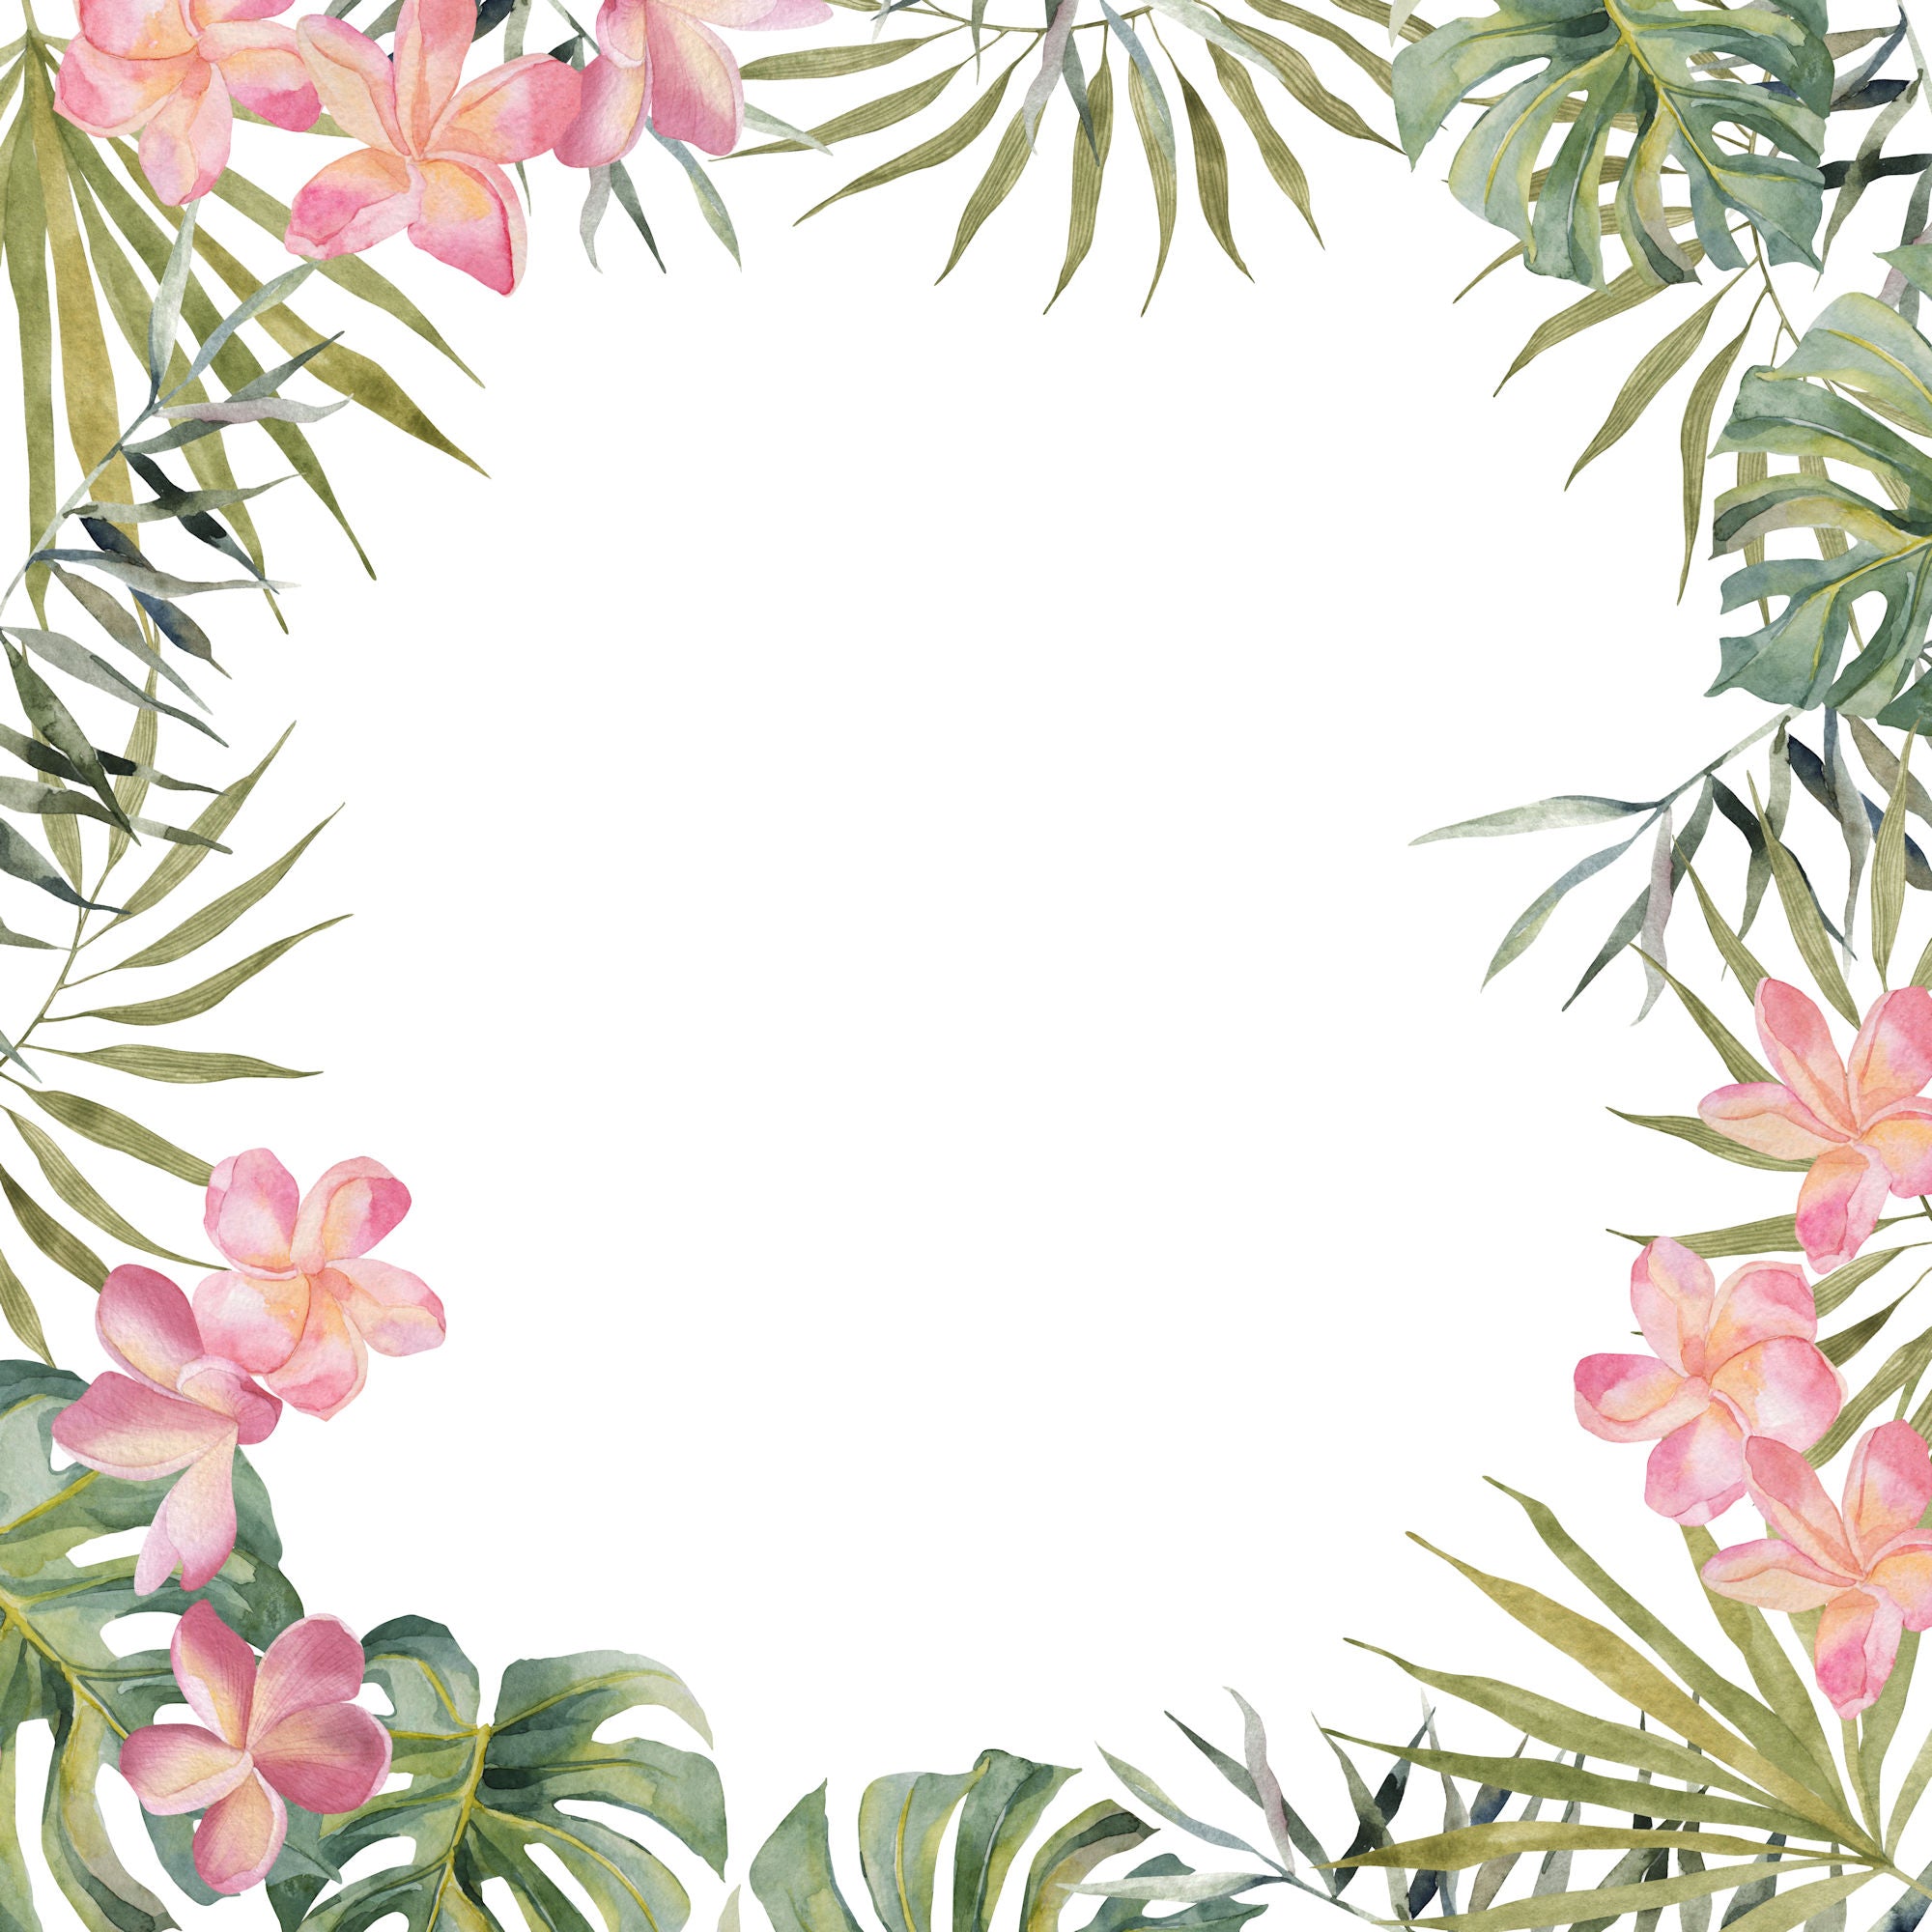 Tropical Paradise Collection Kauai 12 x 12 Double-Sided Scrapbook Paper by SSC Designs